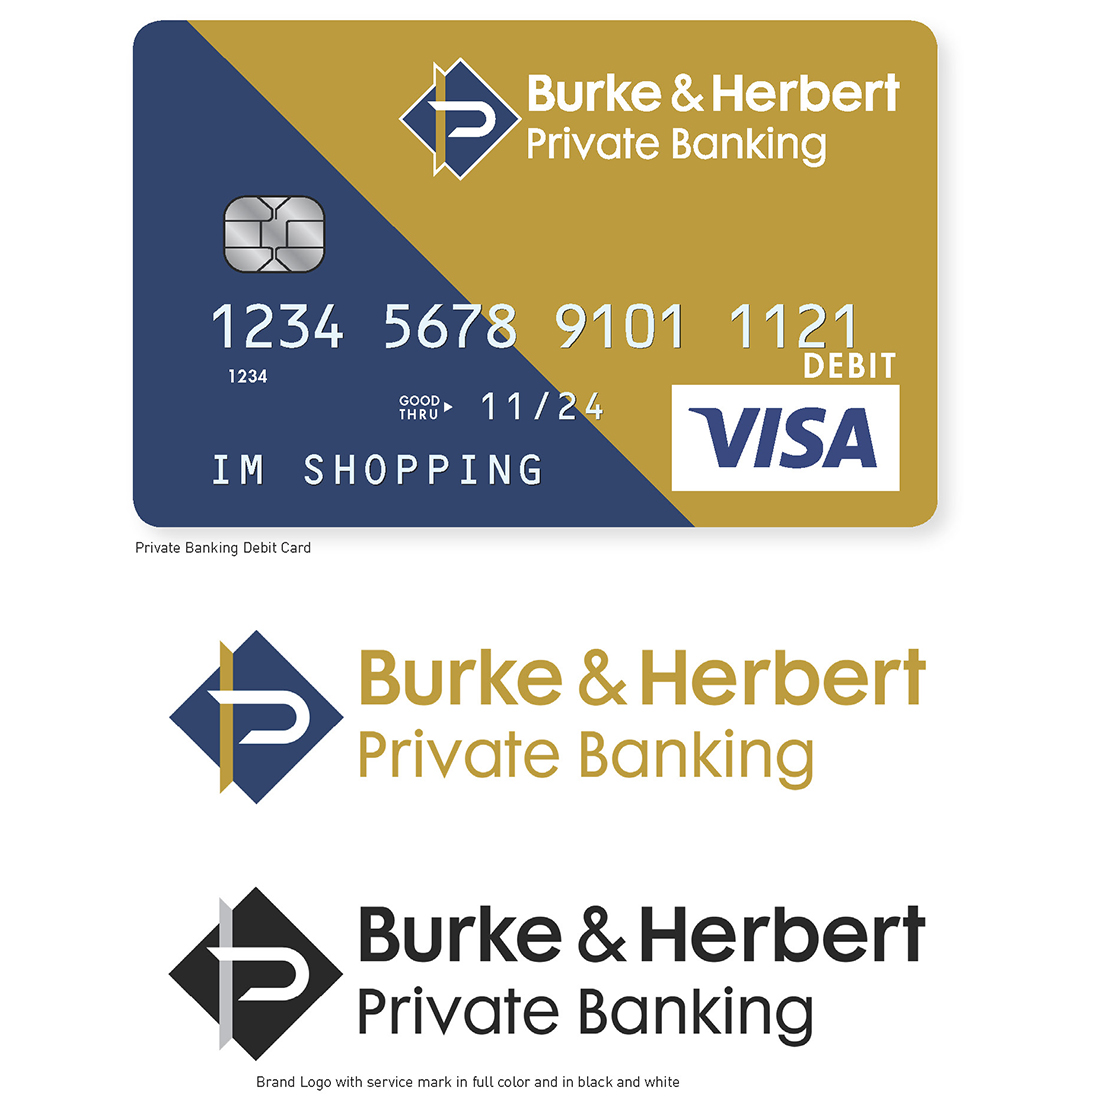 Images of private banking debit card and logos